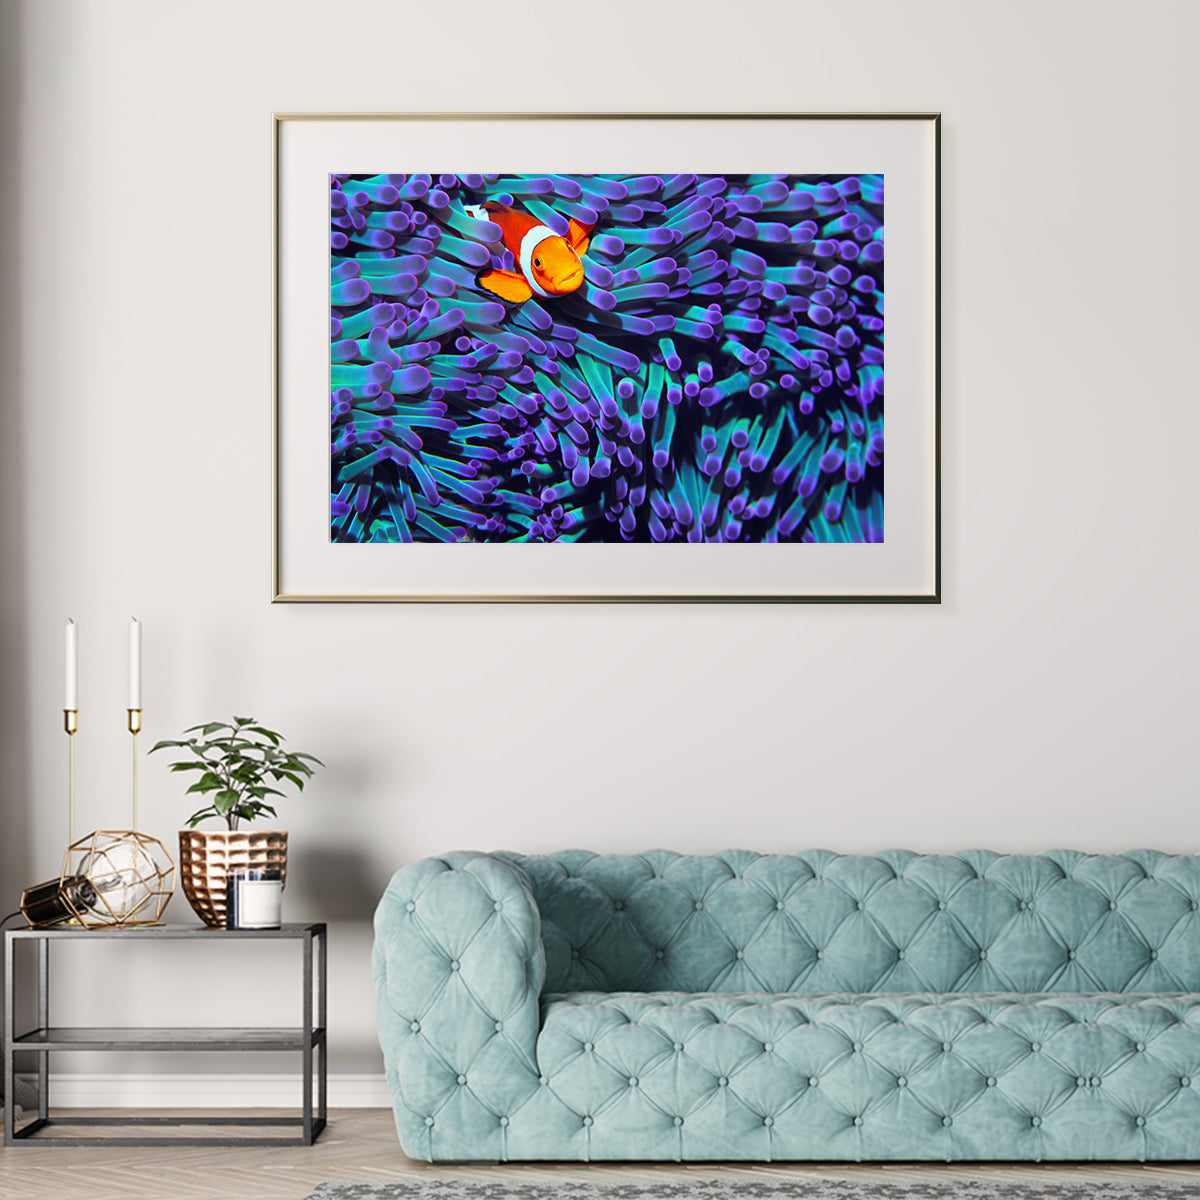 Clown Anemonefish Decorations For Home Poster-Horizontal Posters NOT FRAMED-CetArt-10″x8″ inches-CetArt